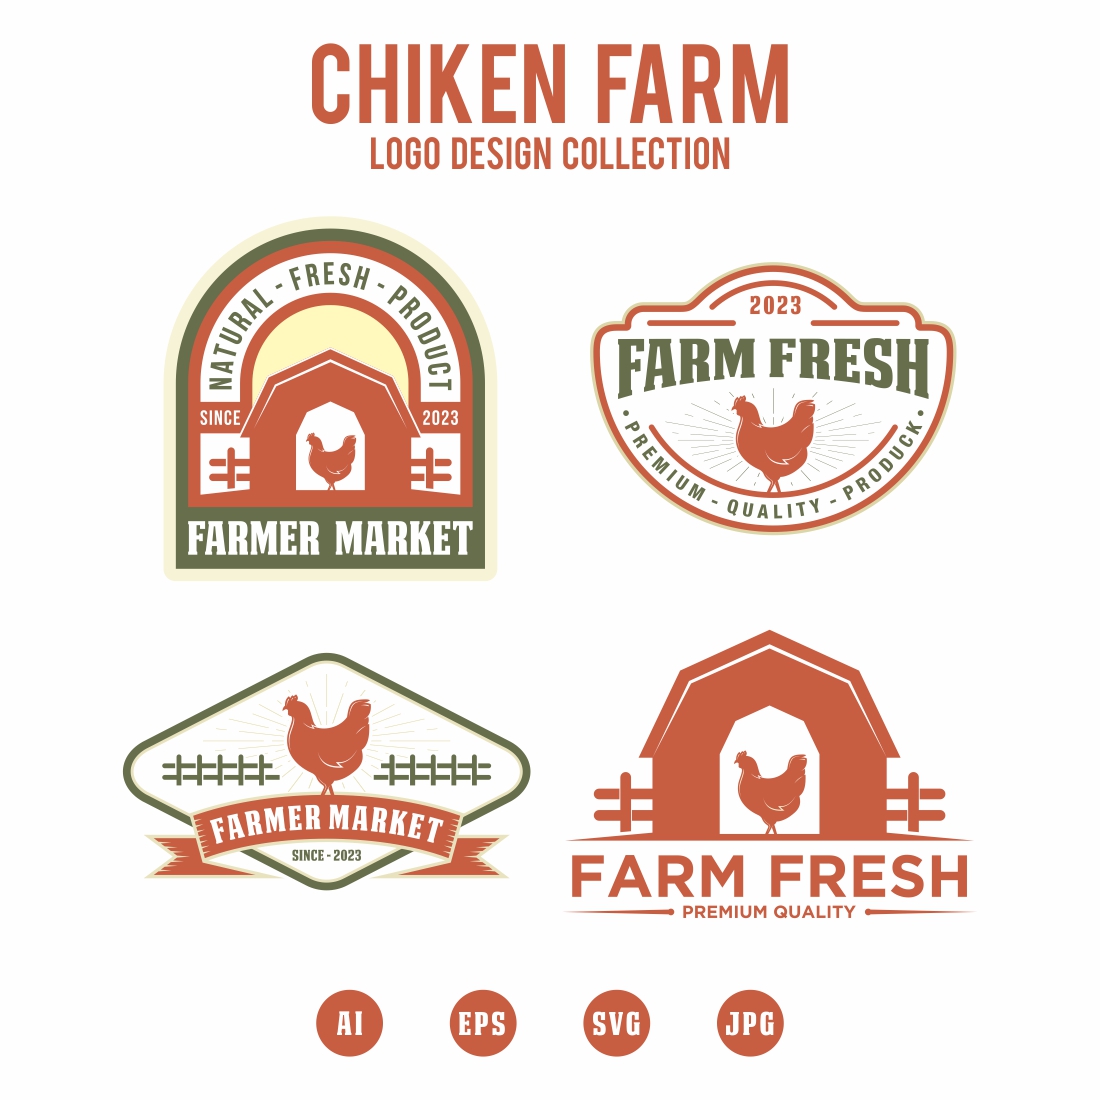 Chicken Farm logo design collection - only 7$ cover image.